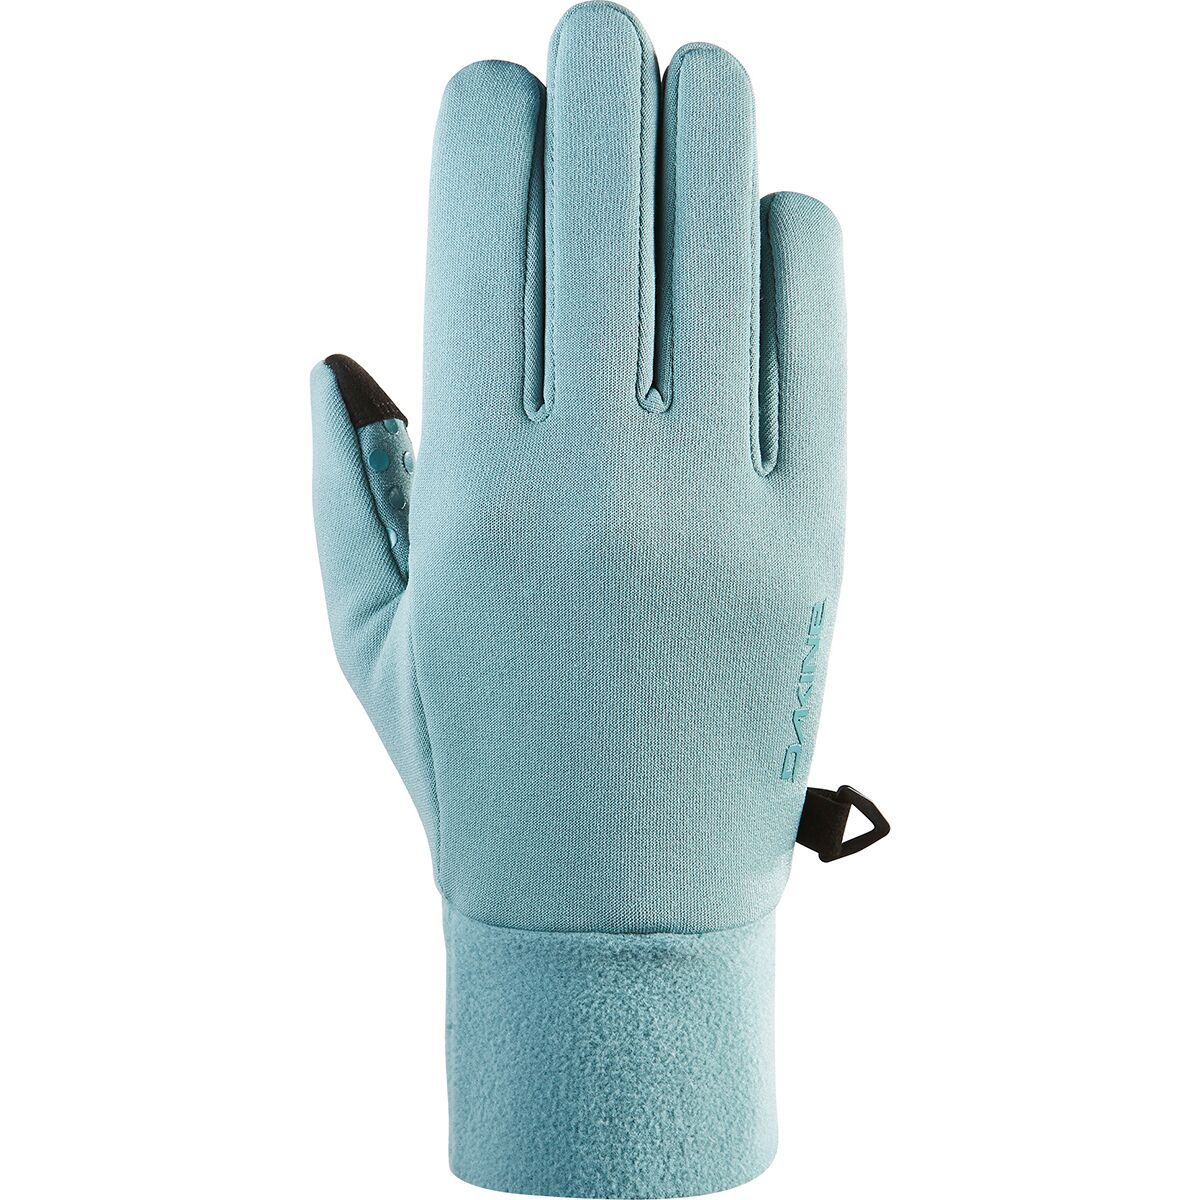 DAKINE Storm Liner Touch Screen Compatible Glove - Women's | Backcountry.com